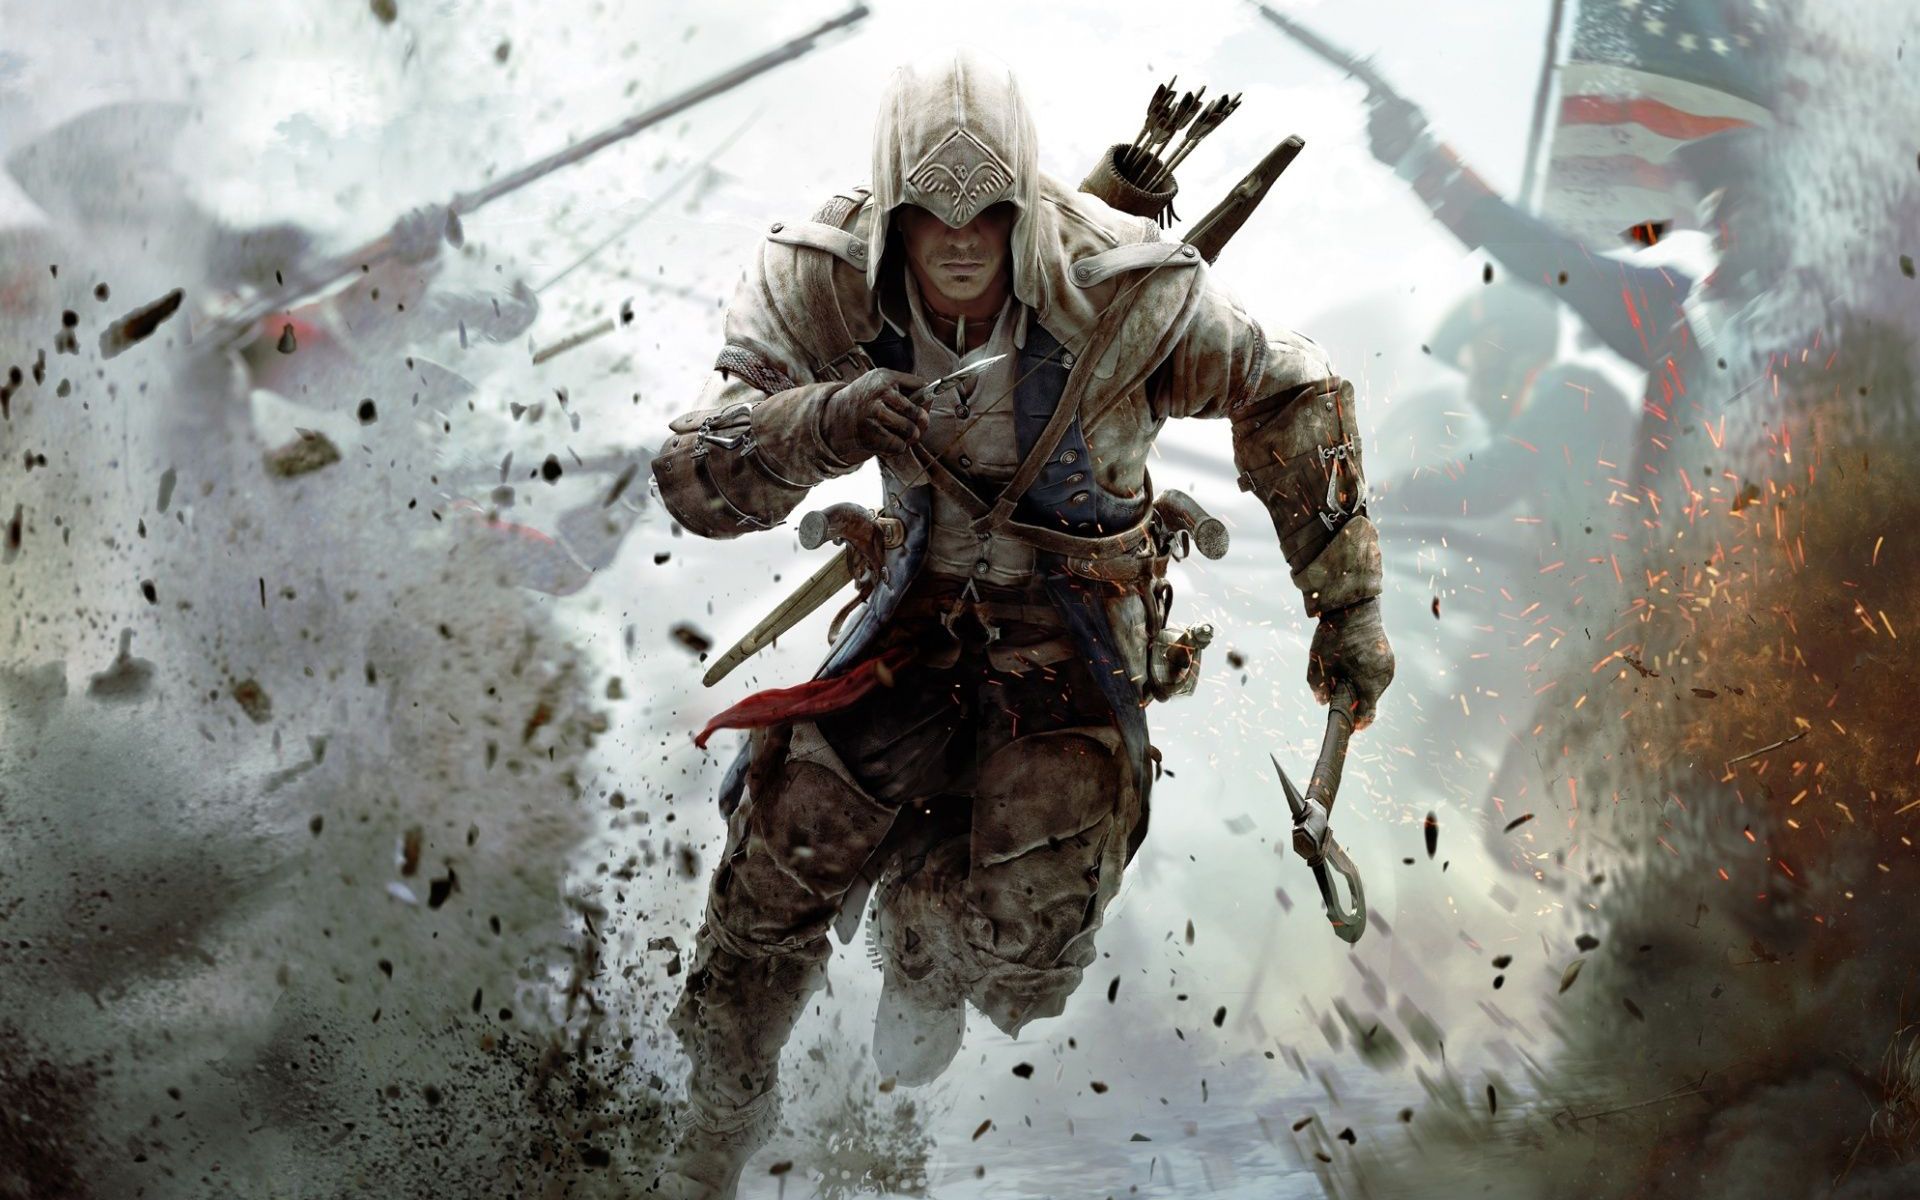 Ubisoft Confirms New Assassin's Creed Will Suck This Year Too